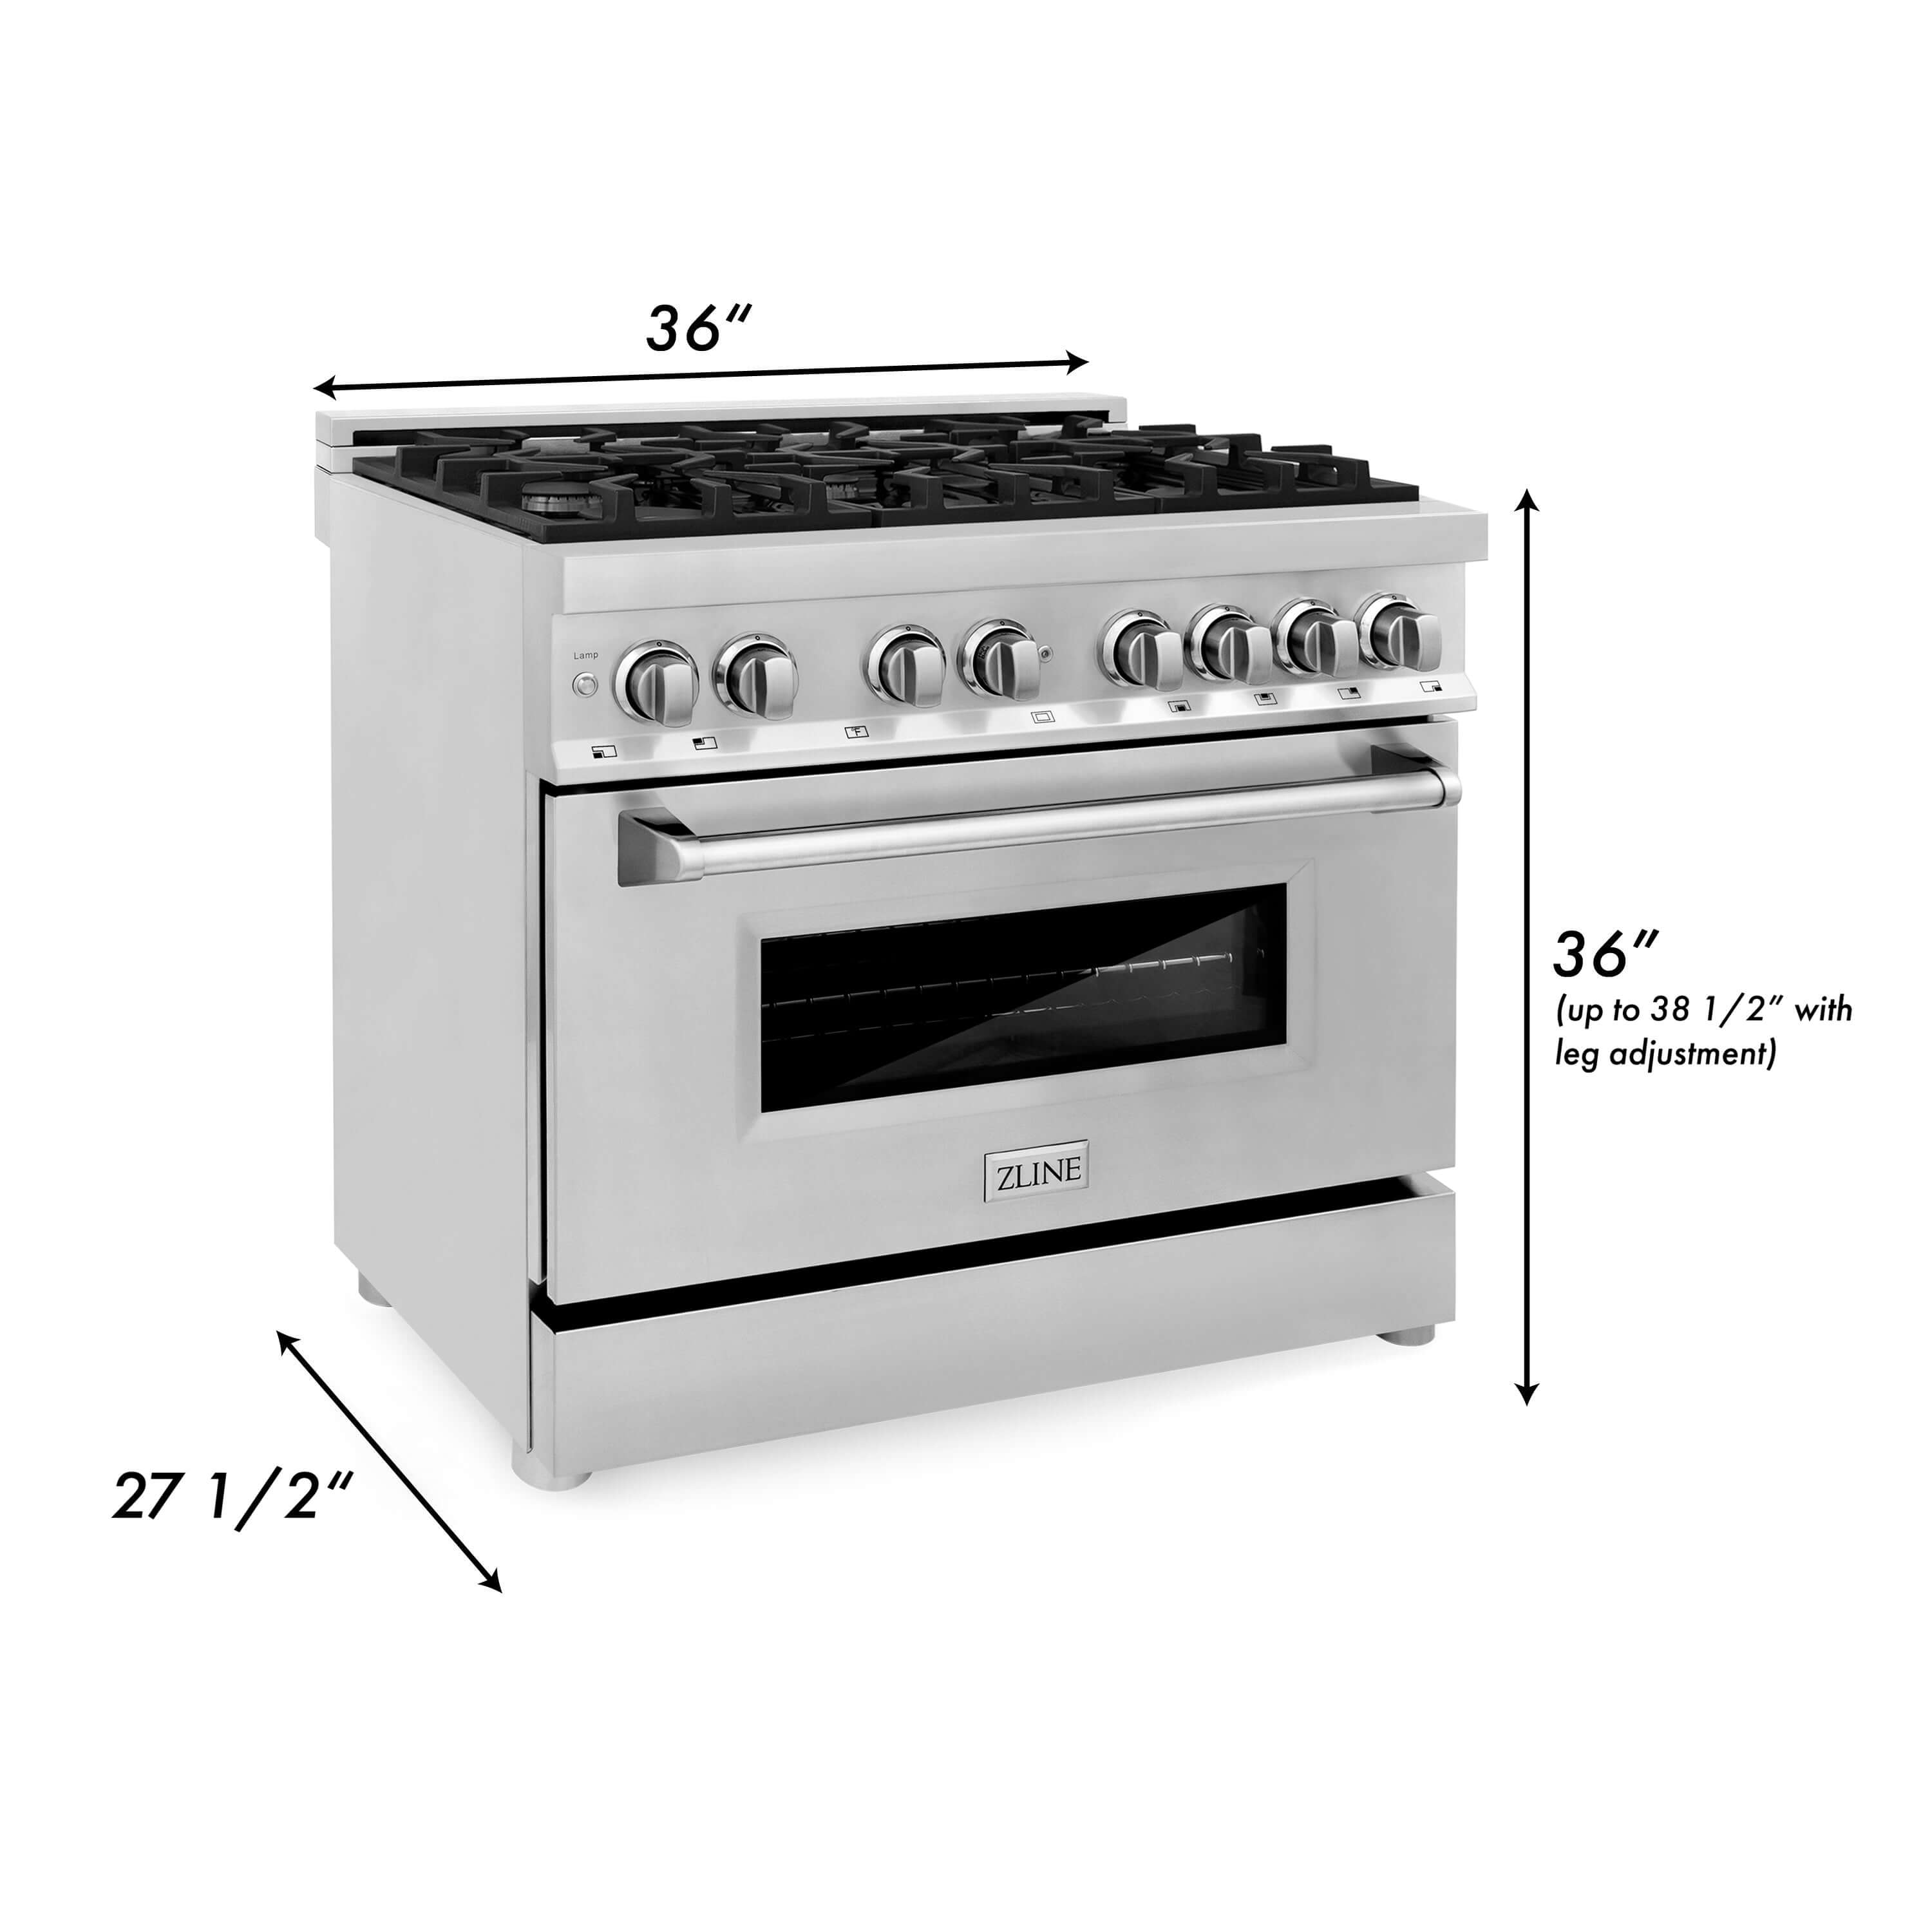 ZLINE 36 in. Kitchen Package with Stainless Steel Dual Fuel Range, Range Hood, Microwave Drawer and Classic Dishwasher (4KP-RARH36-MWDW) dimensional diagram with measurements.